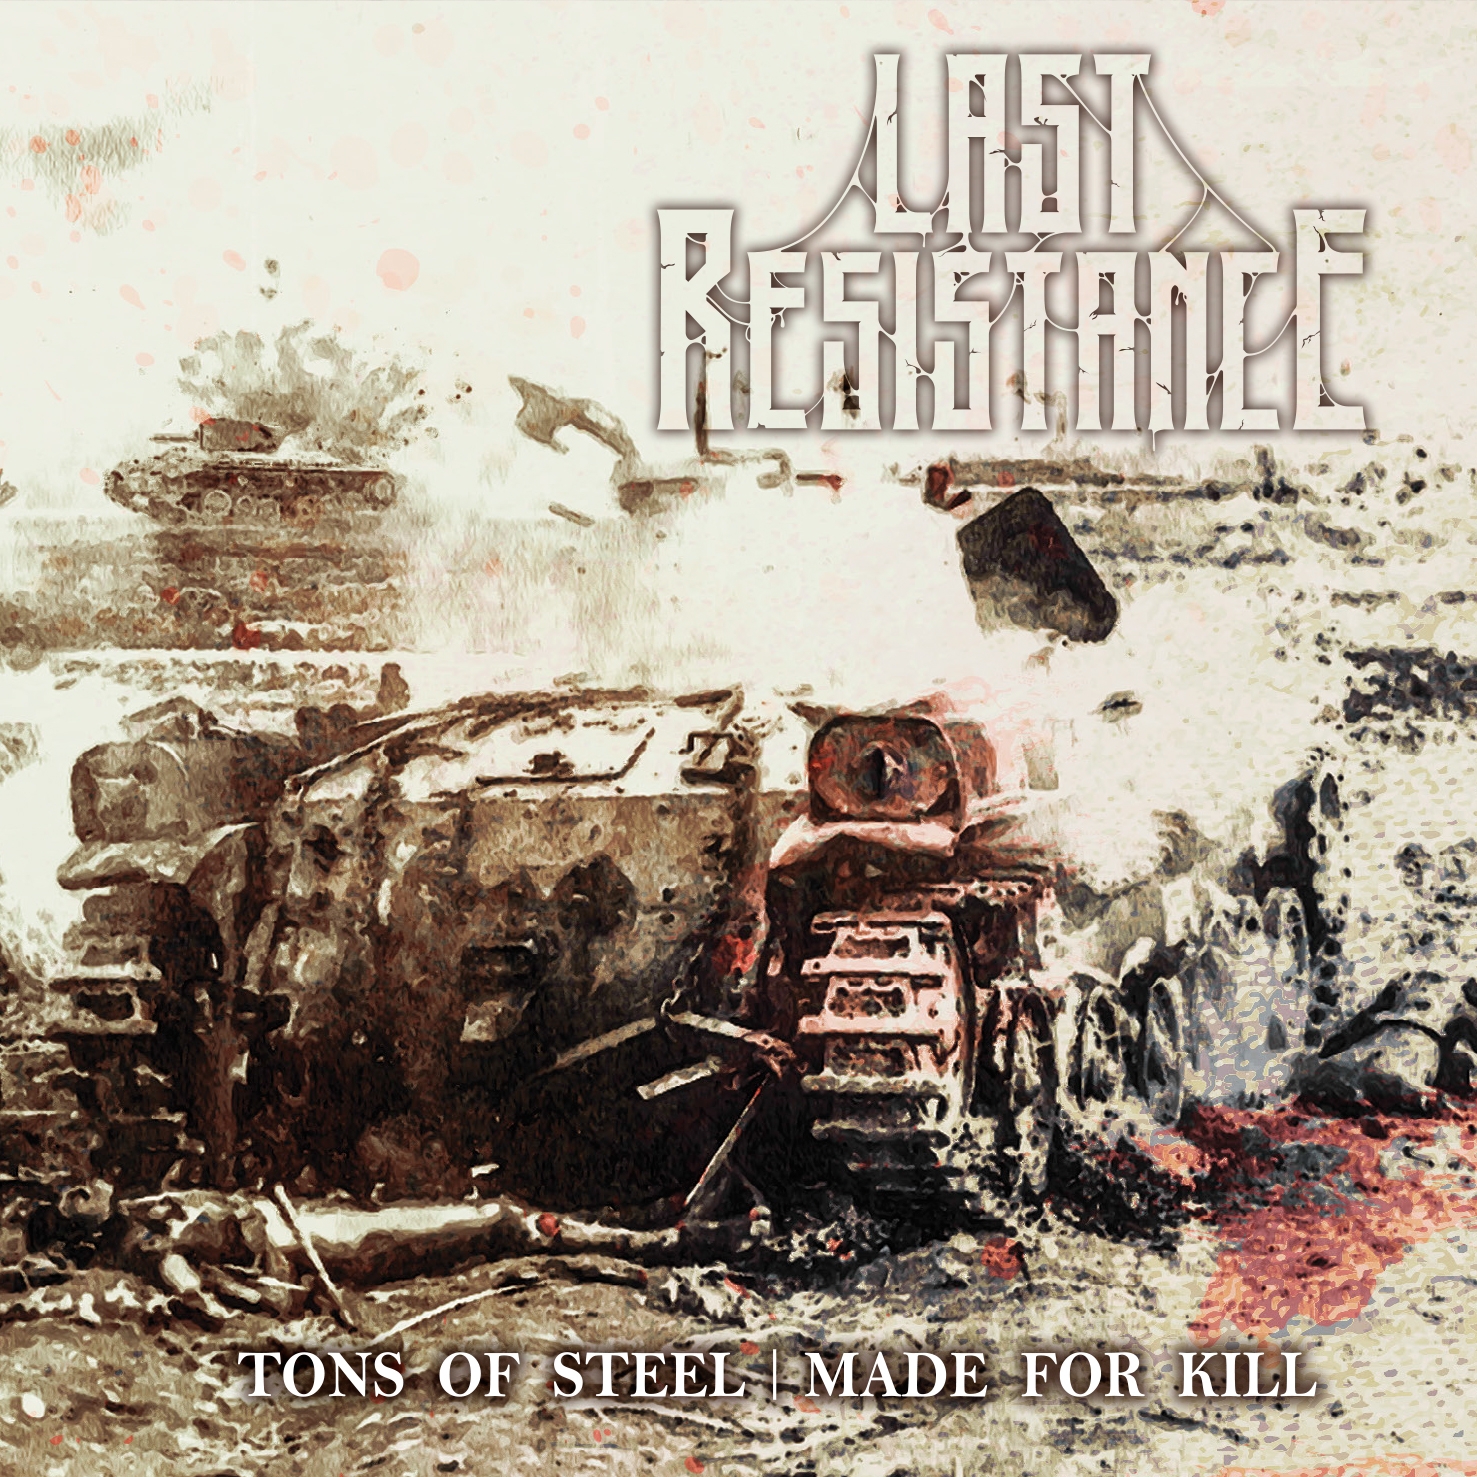 last-resistance-tons-of-steel-made-for-kill-ein-album-review